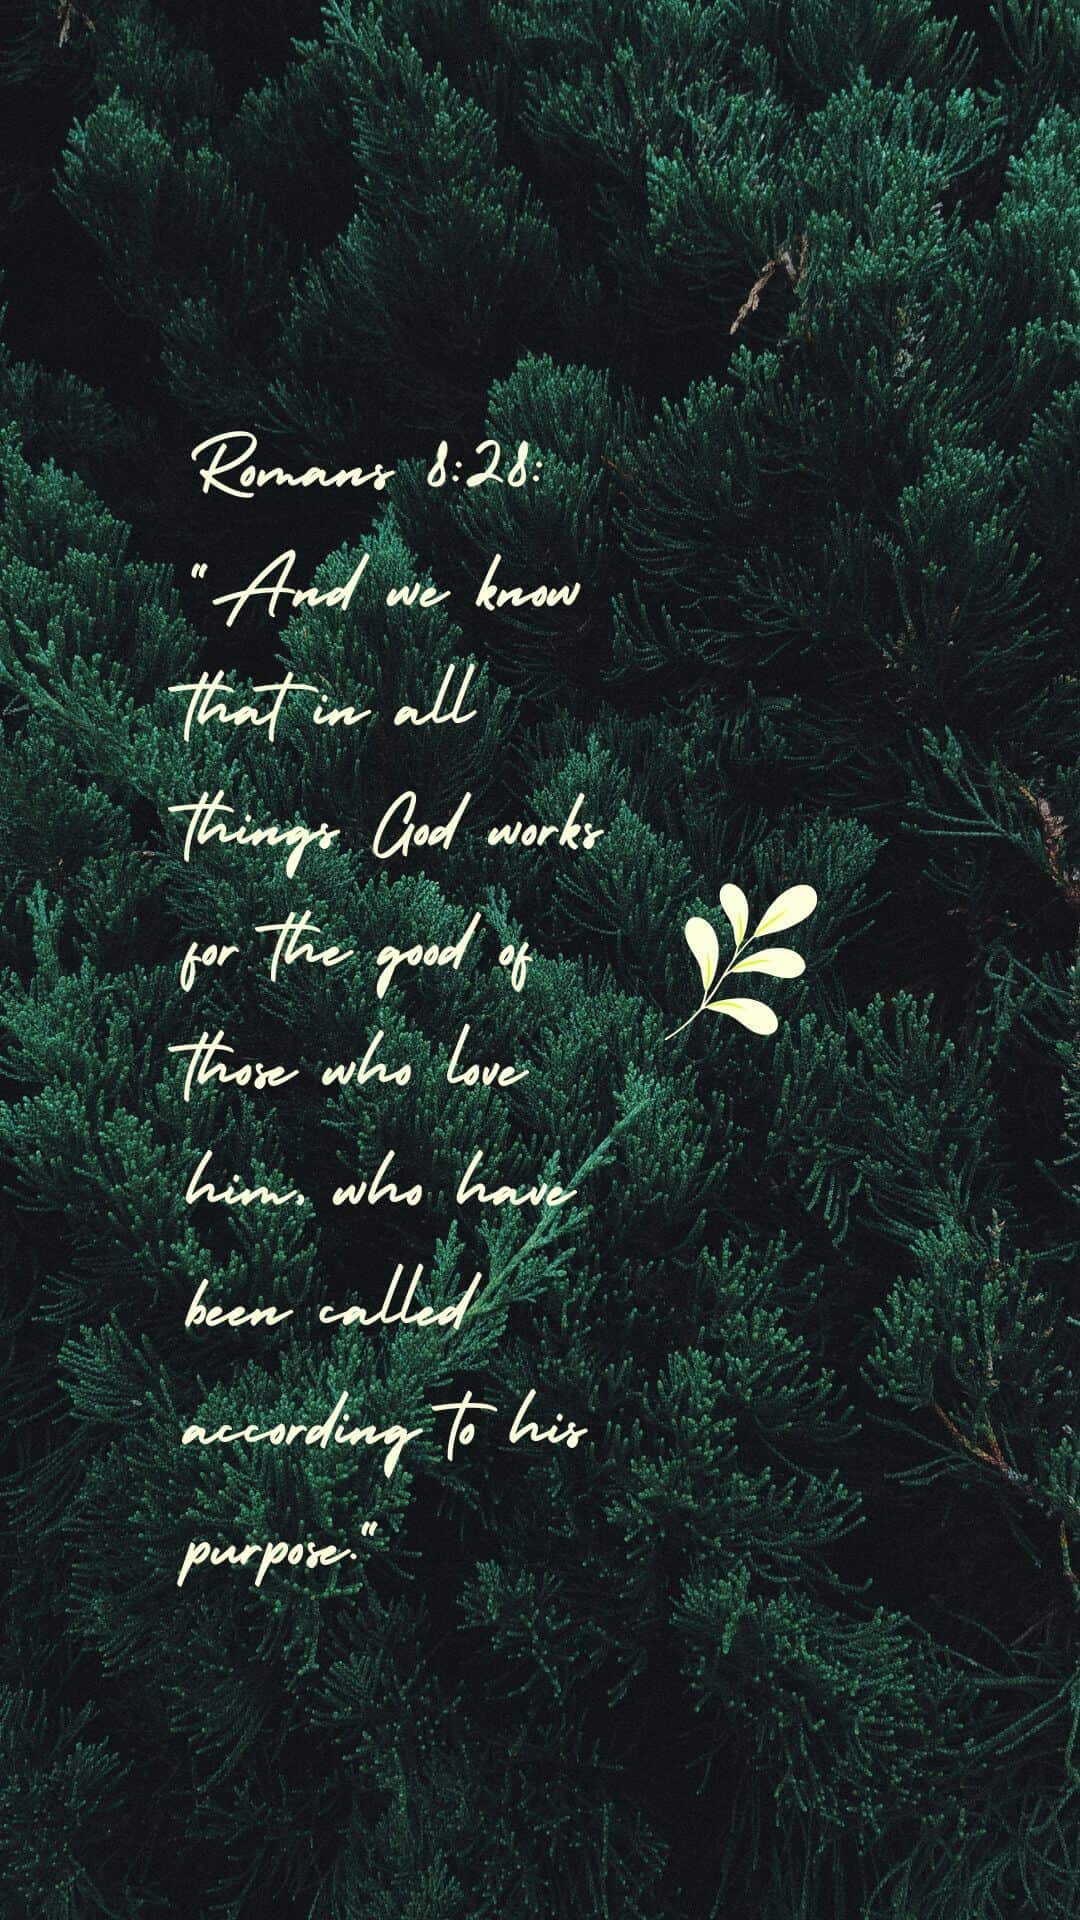 Romans 8:28: "And we know that in all things God works for the good of those who love him, who have been called according to his purpose."